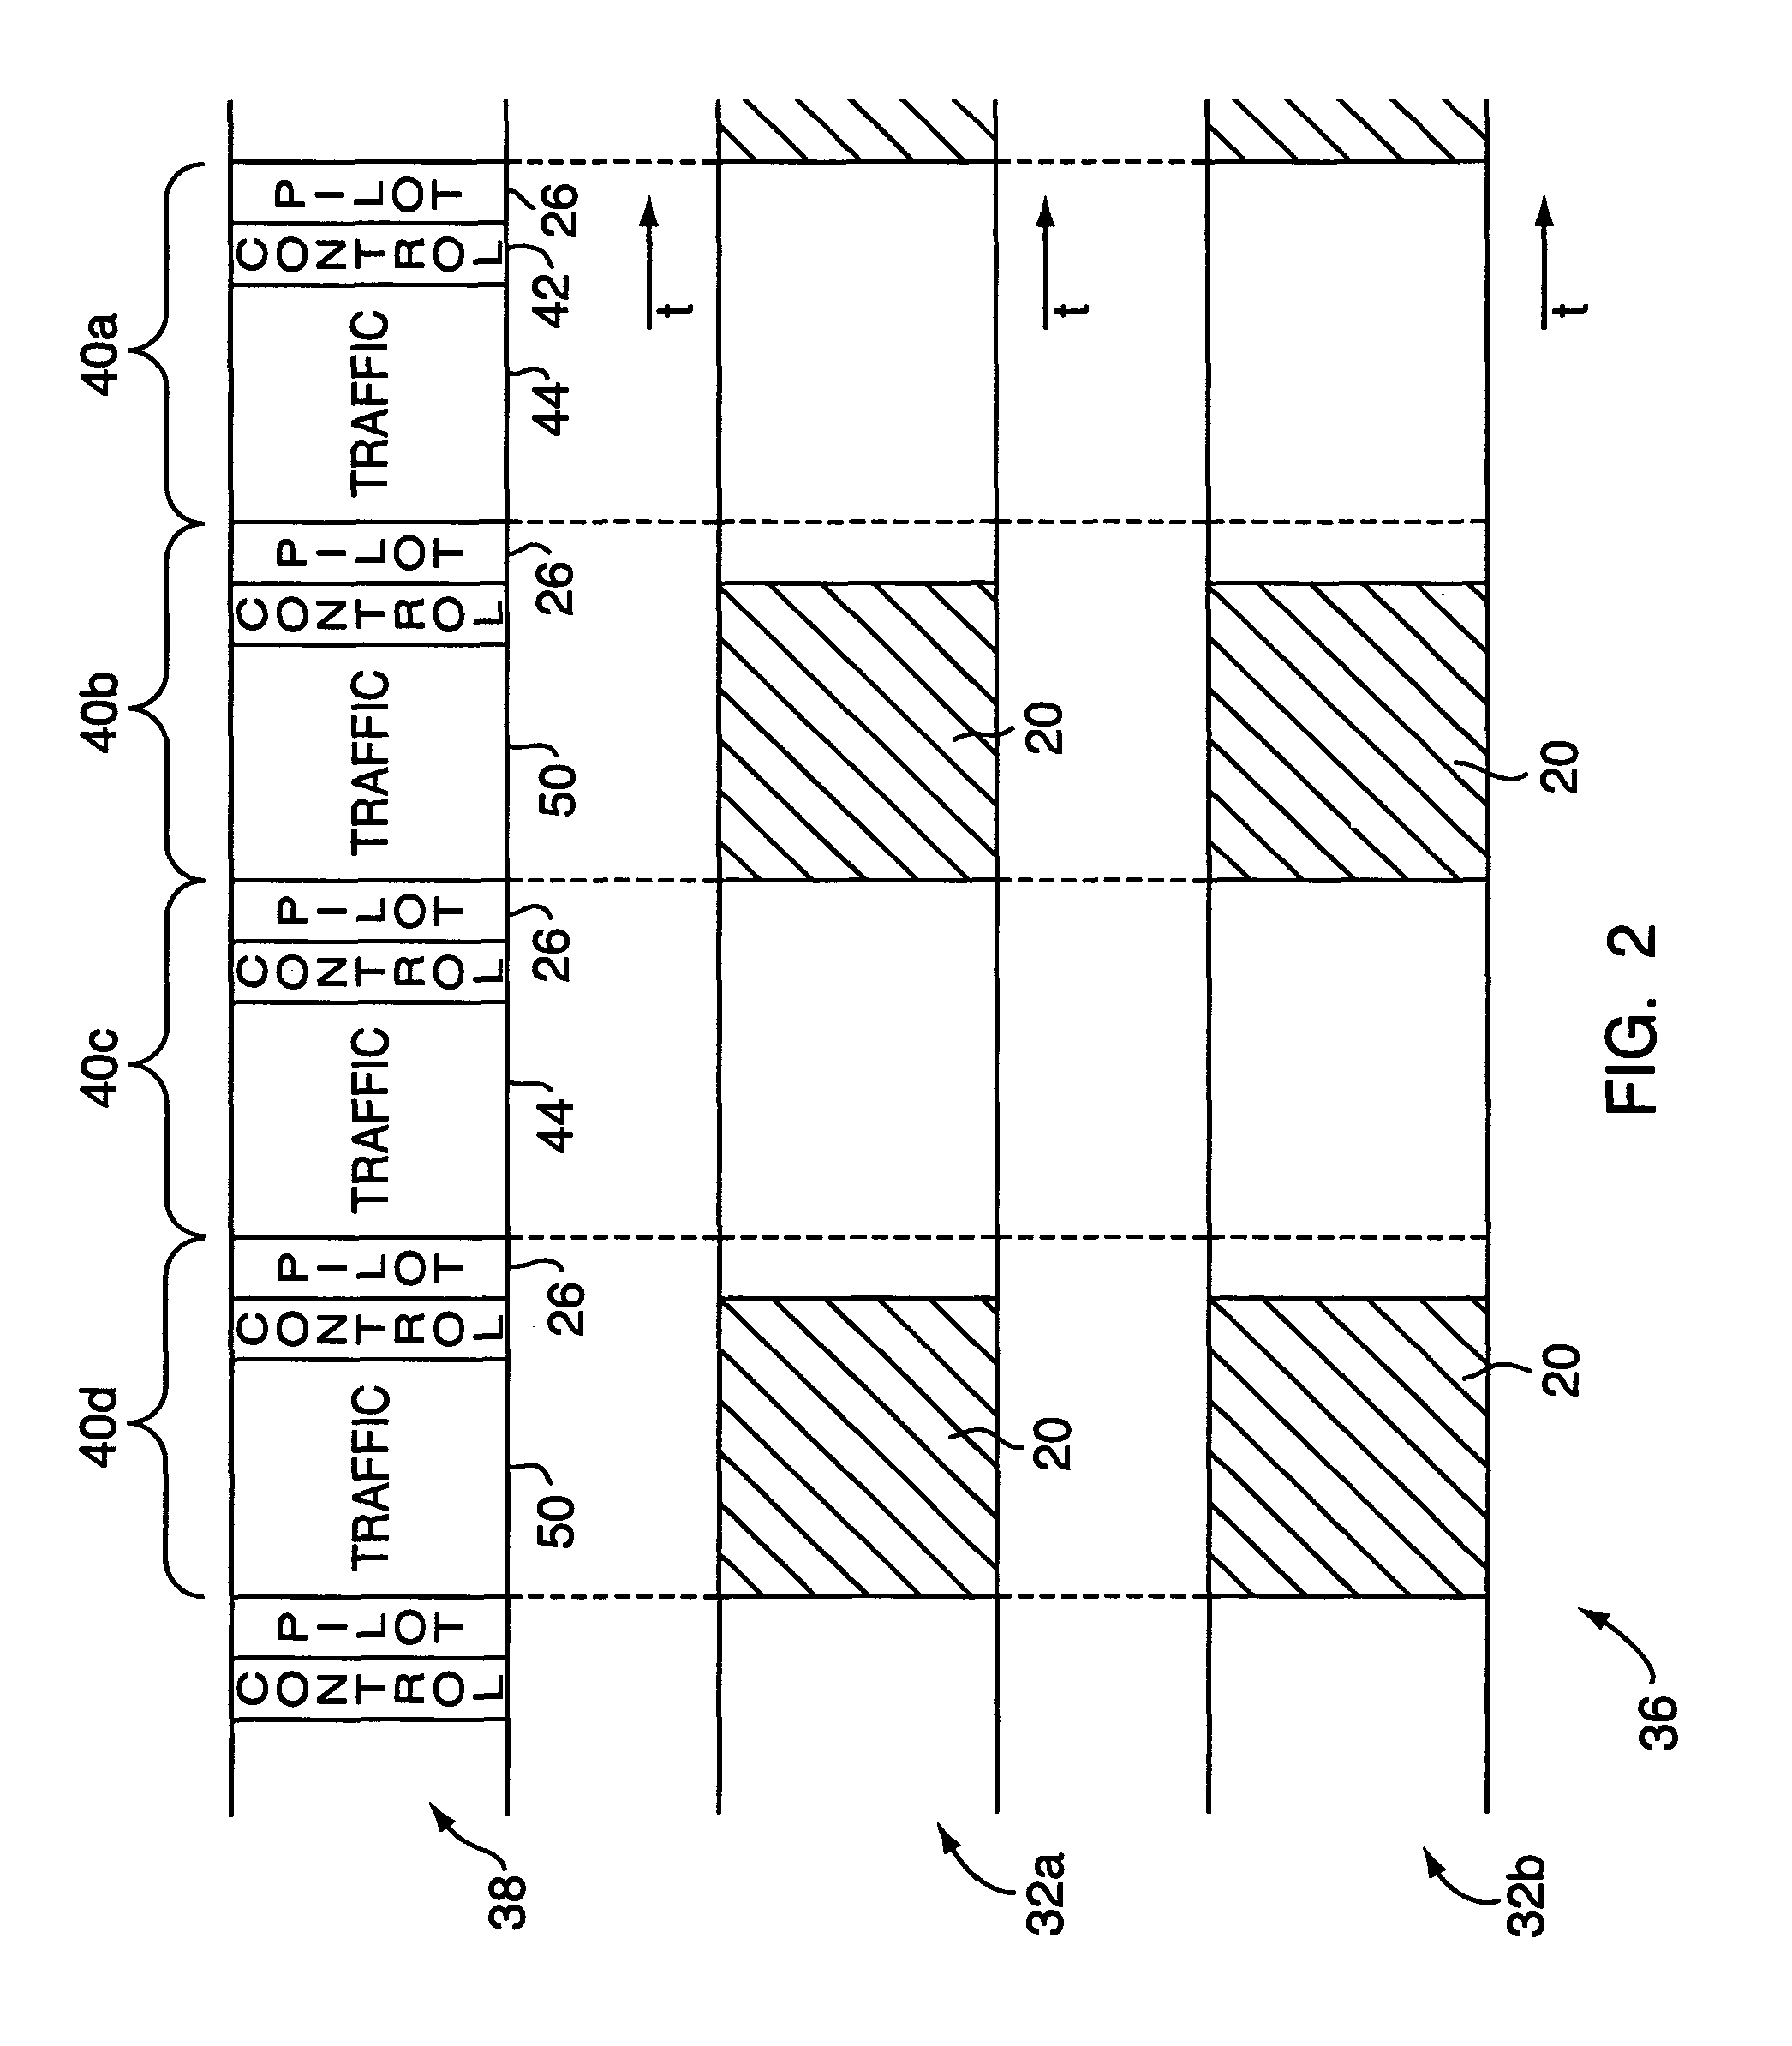 Method for enabling use of secondary pilot signals across a forward link of a CDMA network employing a slotted transmission scheme and time multiplexed pilot channel